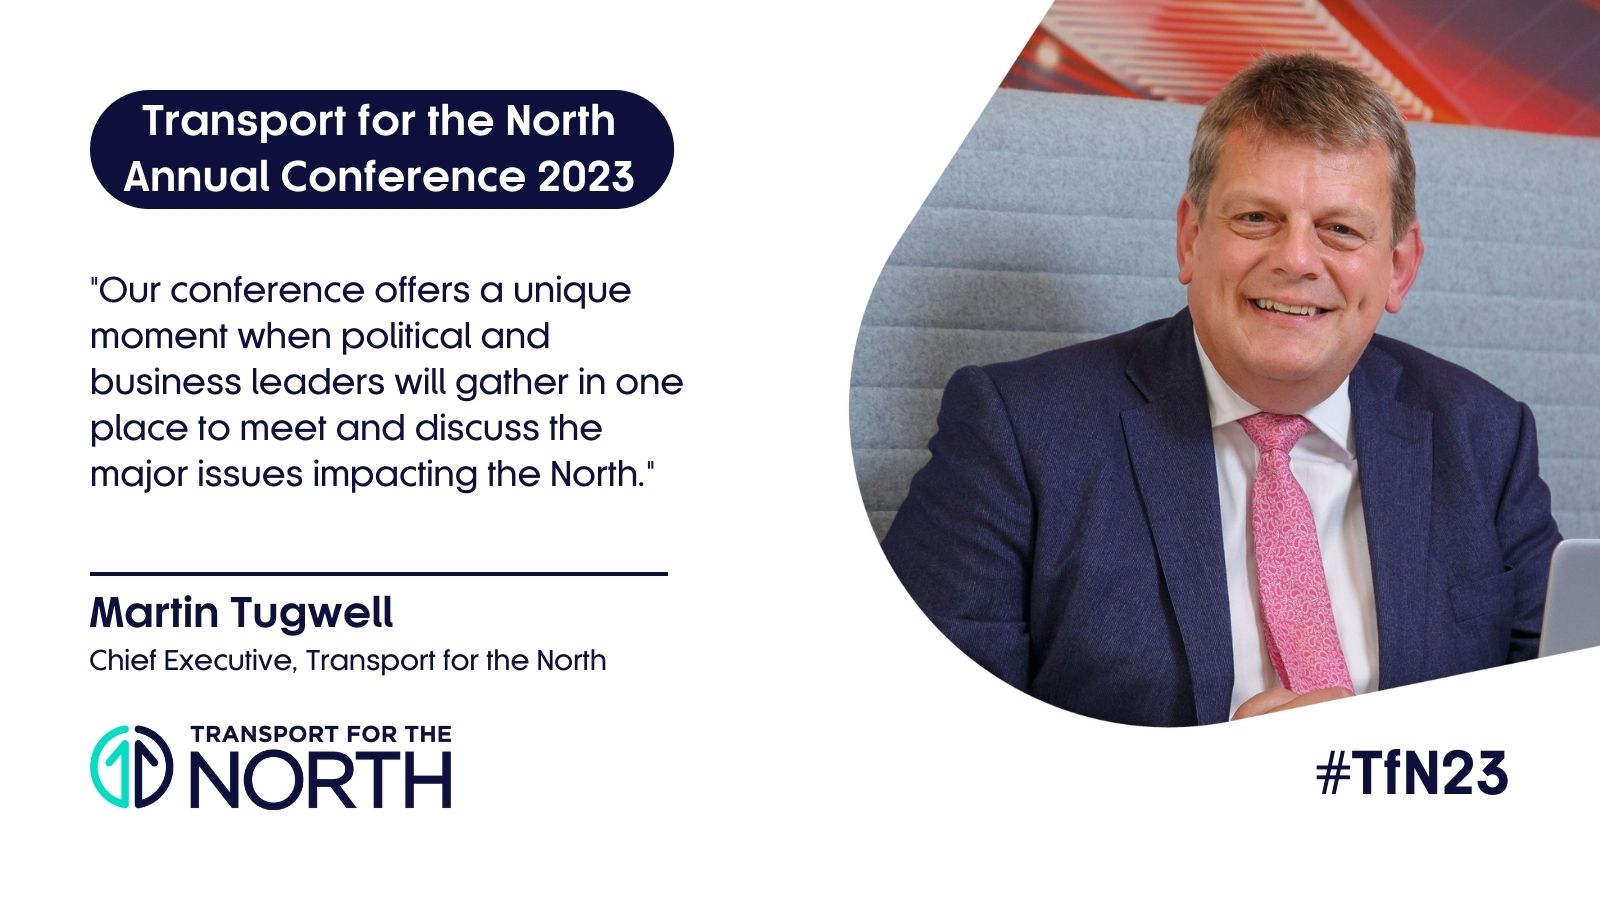 TfN chief executive Martin Tugwell comments ahead of the Annual Conference 2023